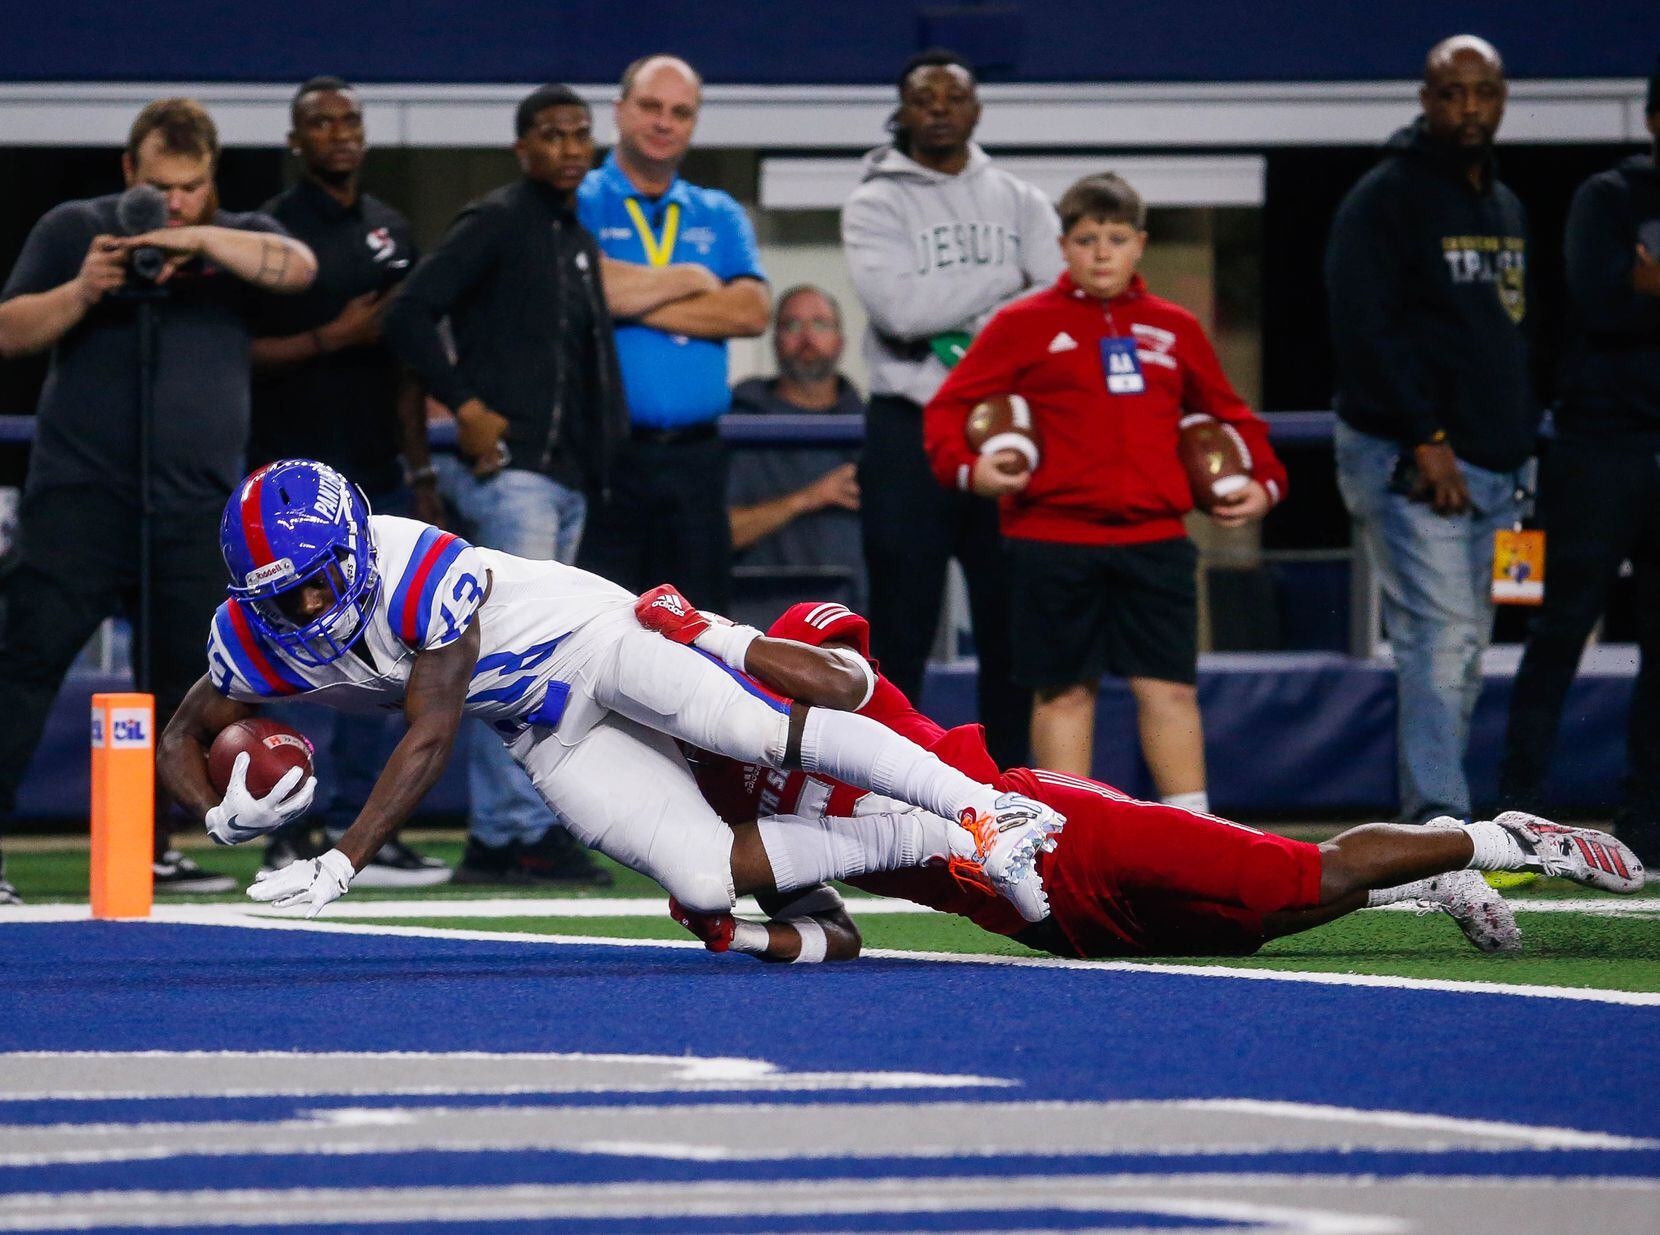 Duncanville's Roderick Daniels (13) scores a touchdown while being tackled by North Shore's...